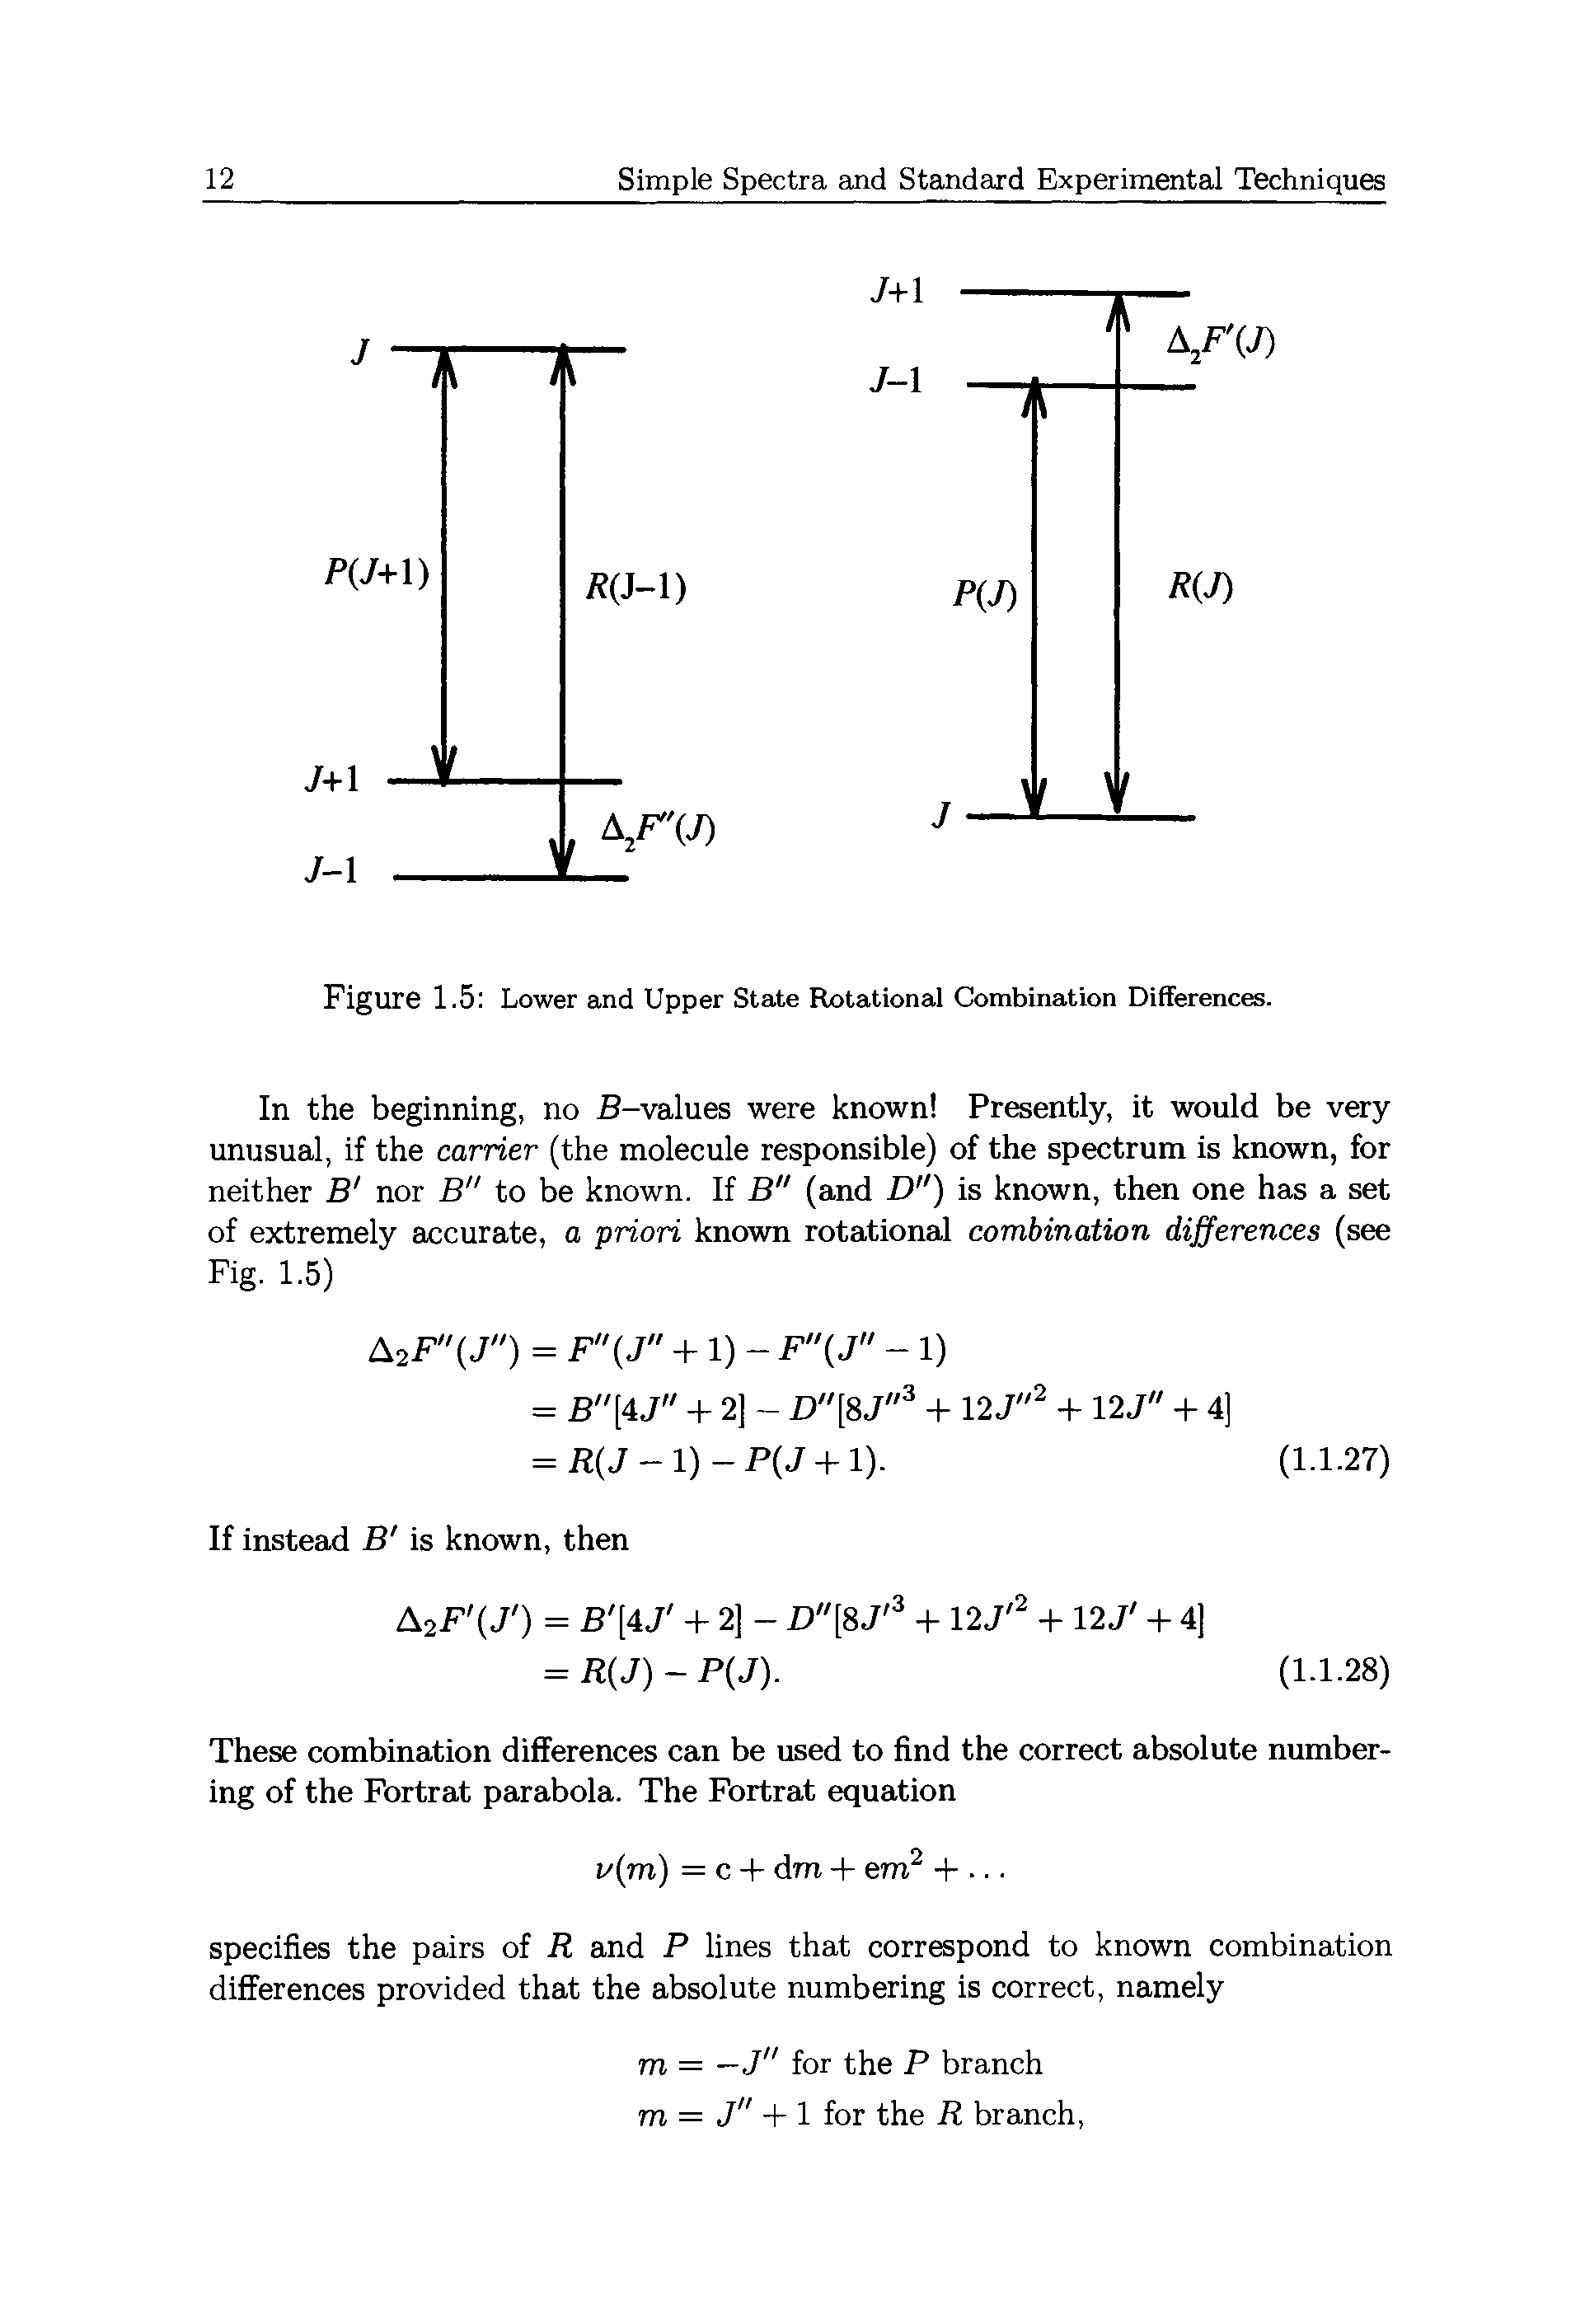 Figure 1.5 Lower and Upper State Rotational Combination Differences.